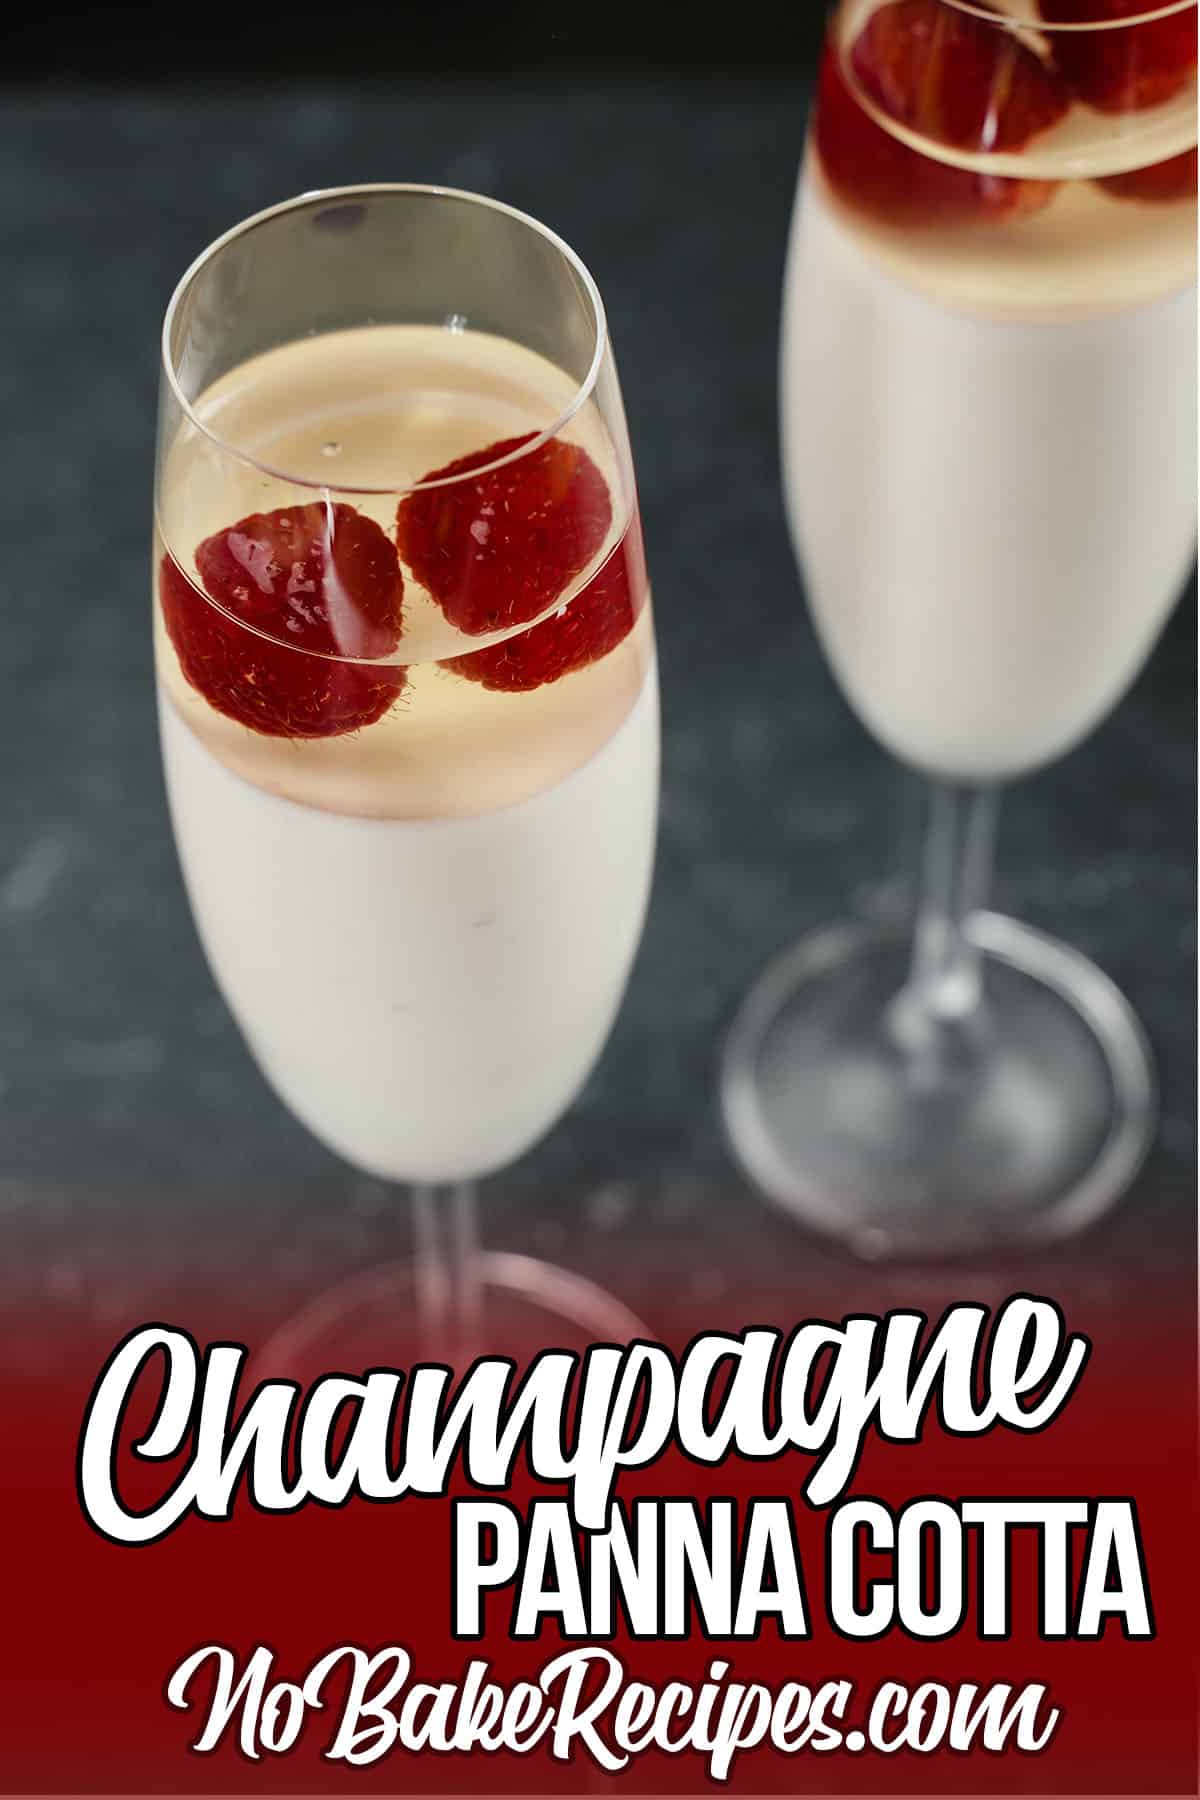 overhead view of glasses filled with champagne flavored panna cotta with text which reads champagne panna cotta